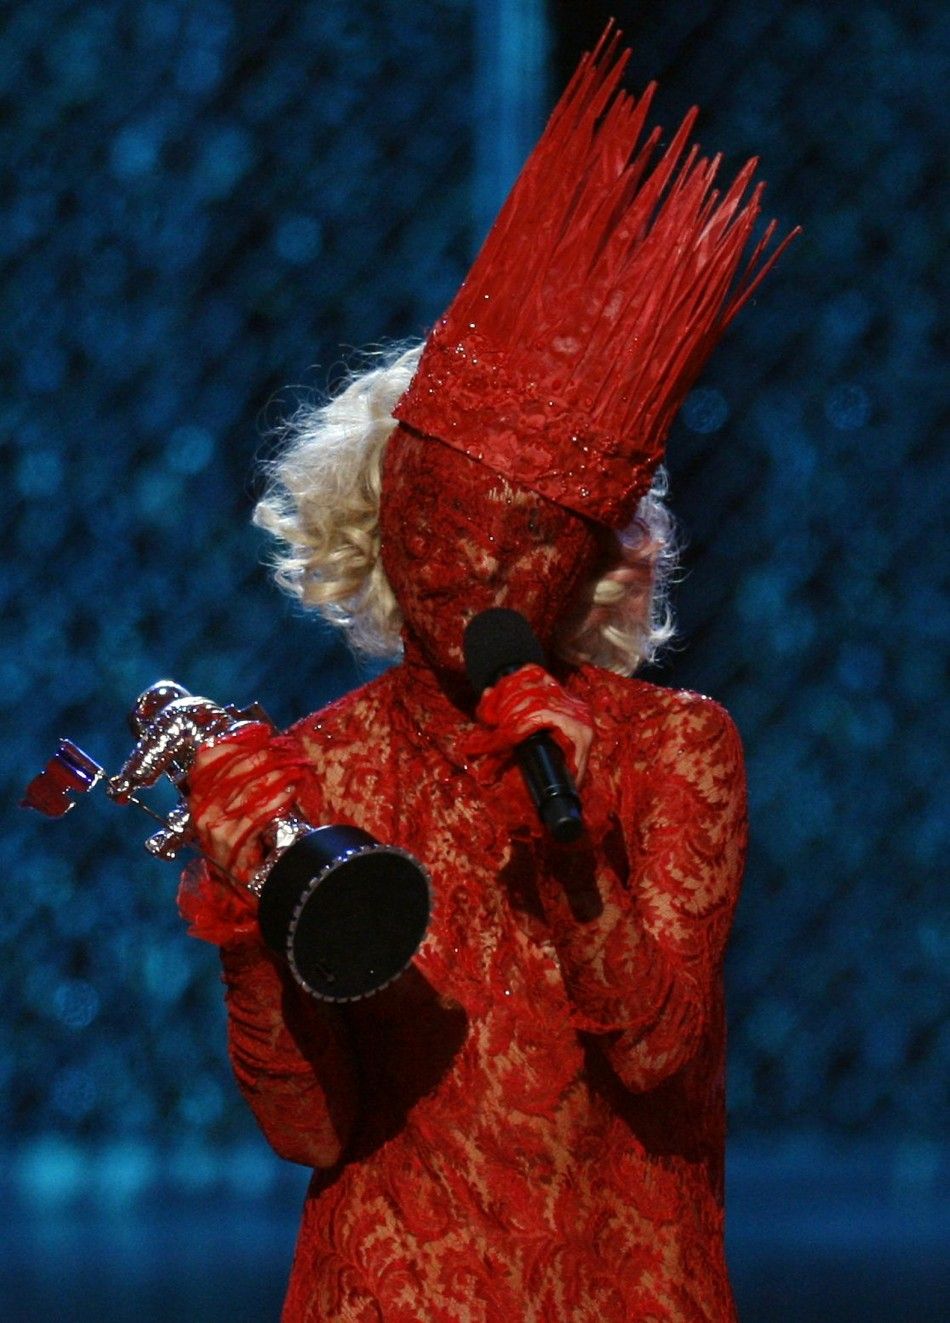 Lady Gaga accepts the award for best new artist at the 2009 MTV Video Music Awards in New York